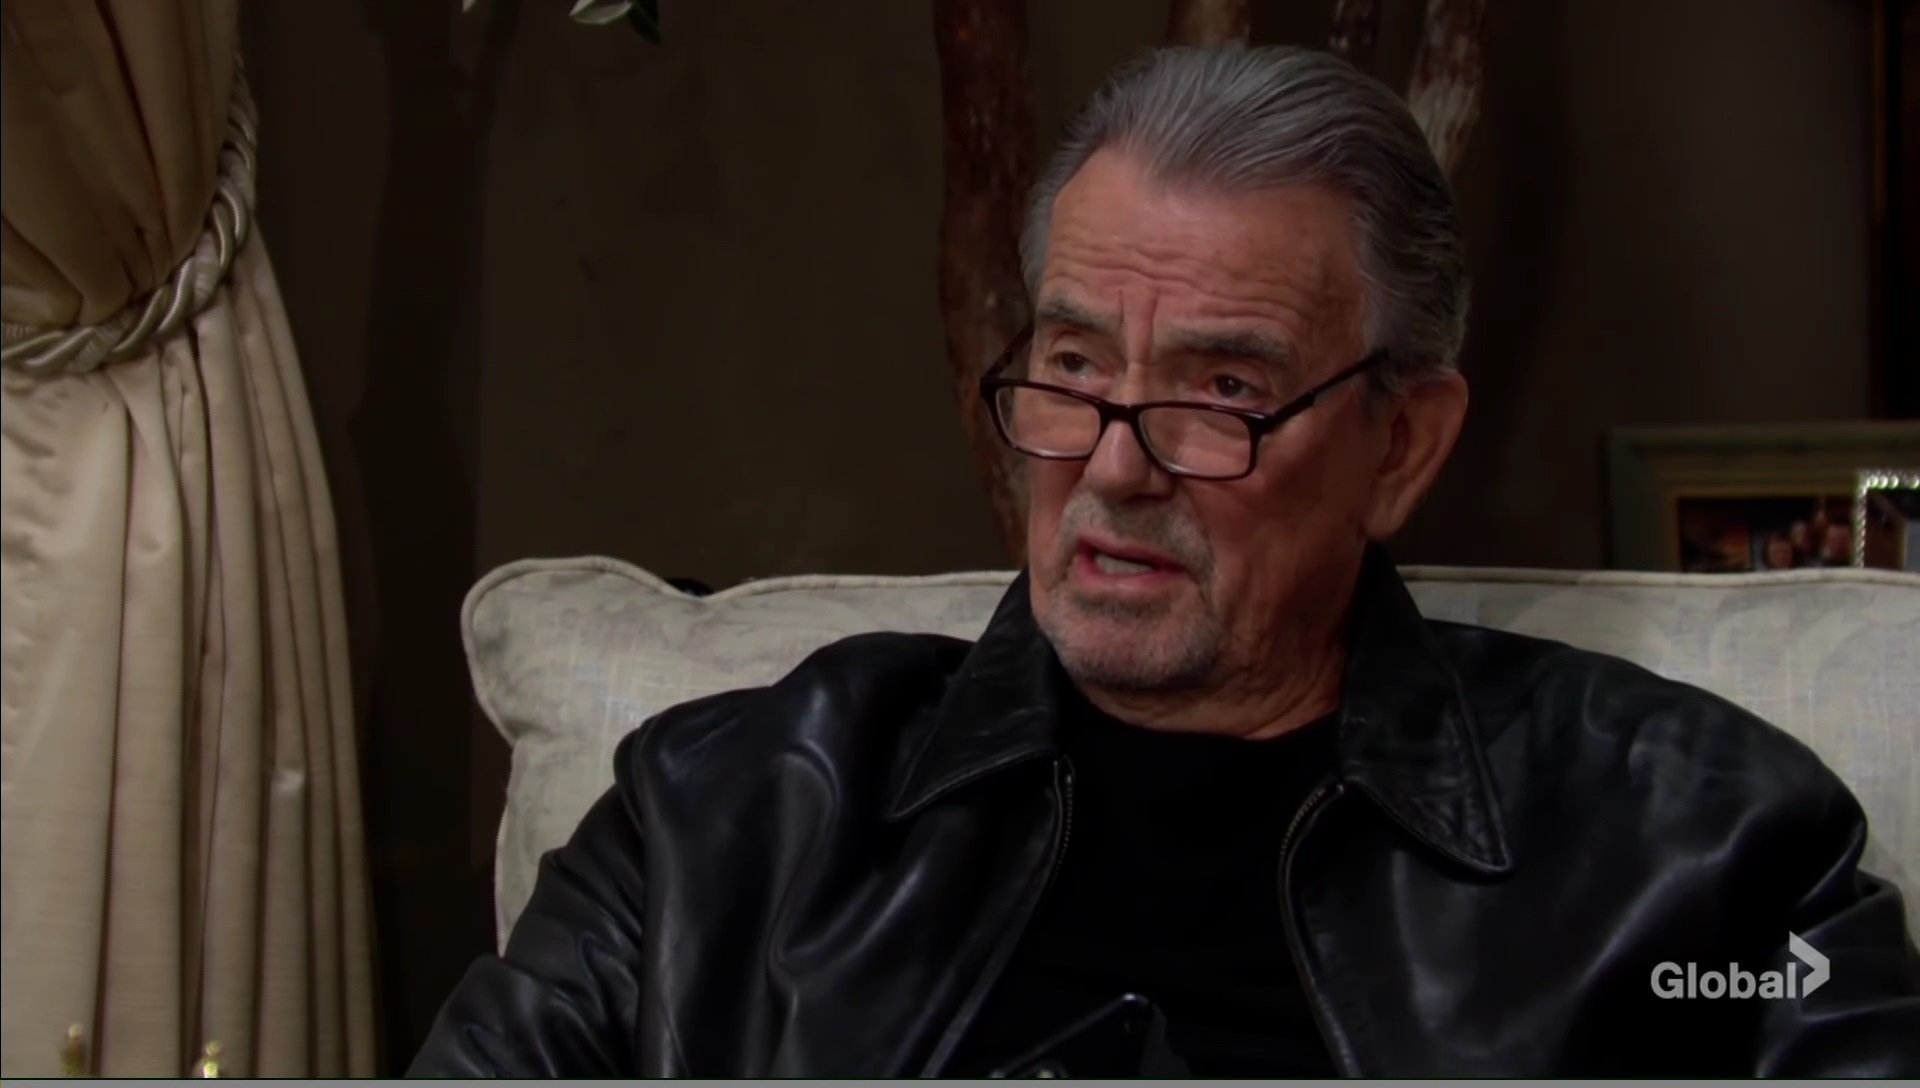 victor gives ultimatum adam young and restless cbs